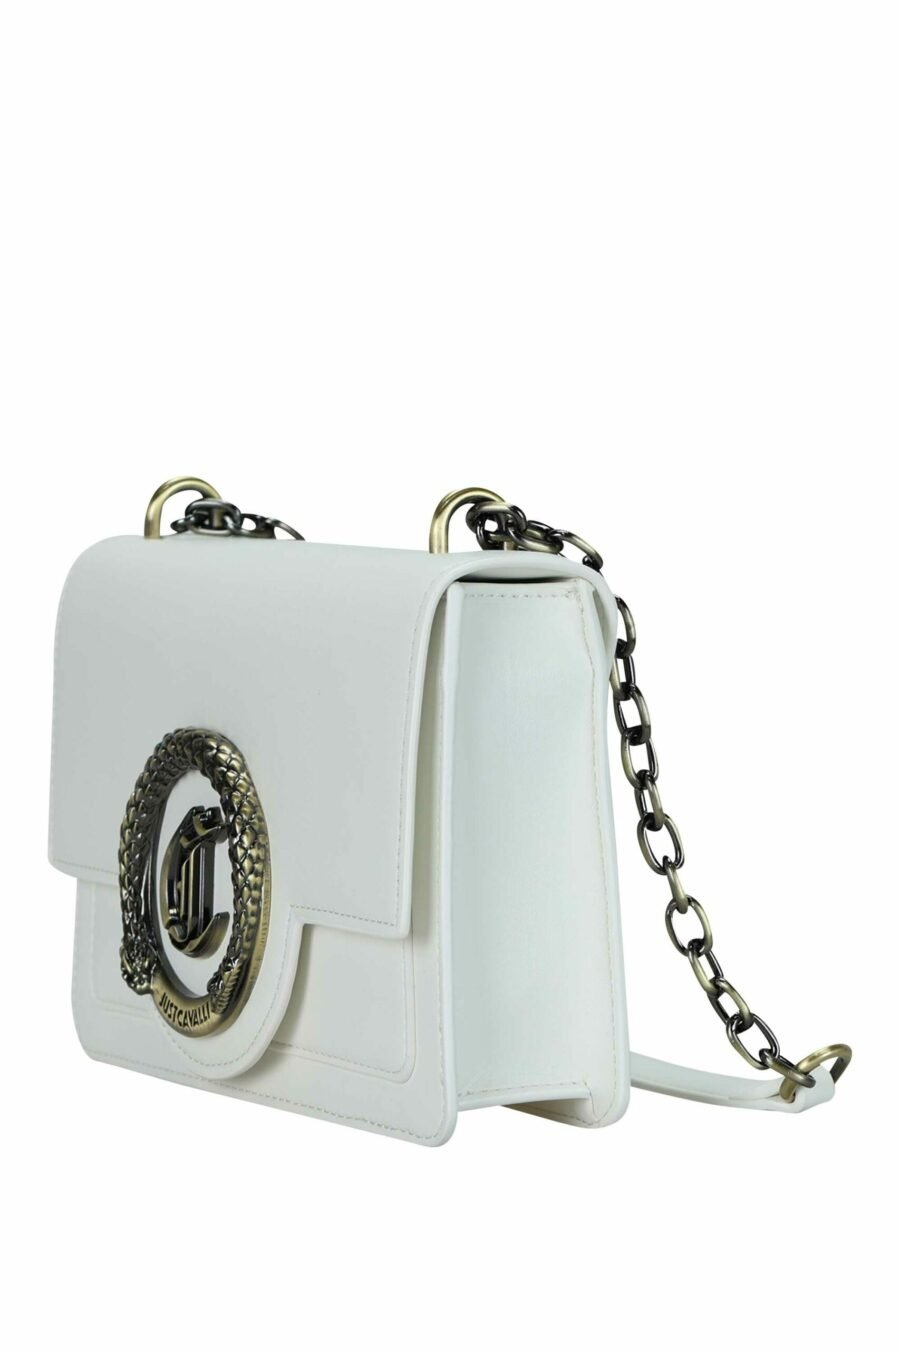 White square shoulder bag with chain and golden circular "c" logo - 8052672735584 1 scaled